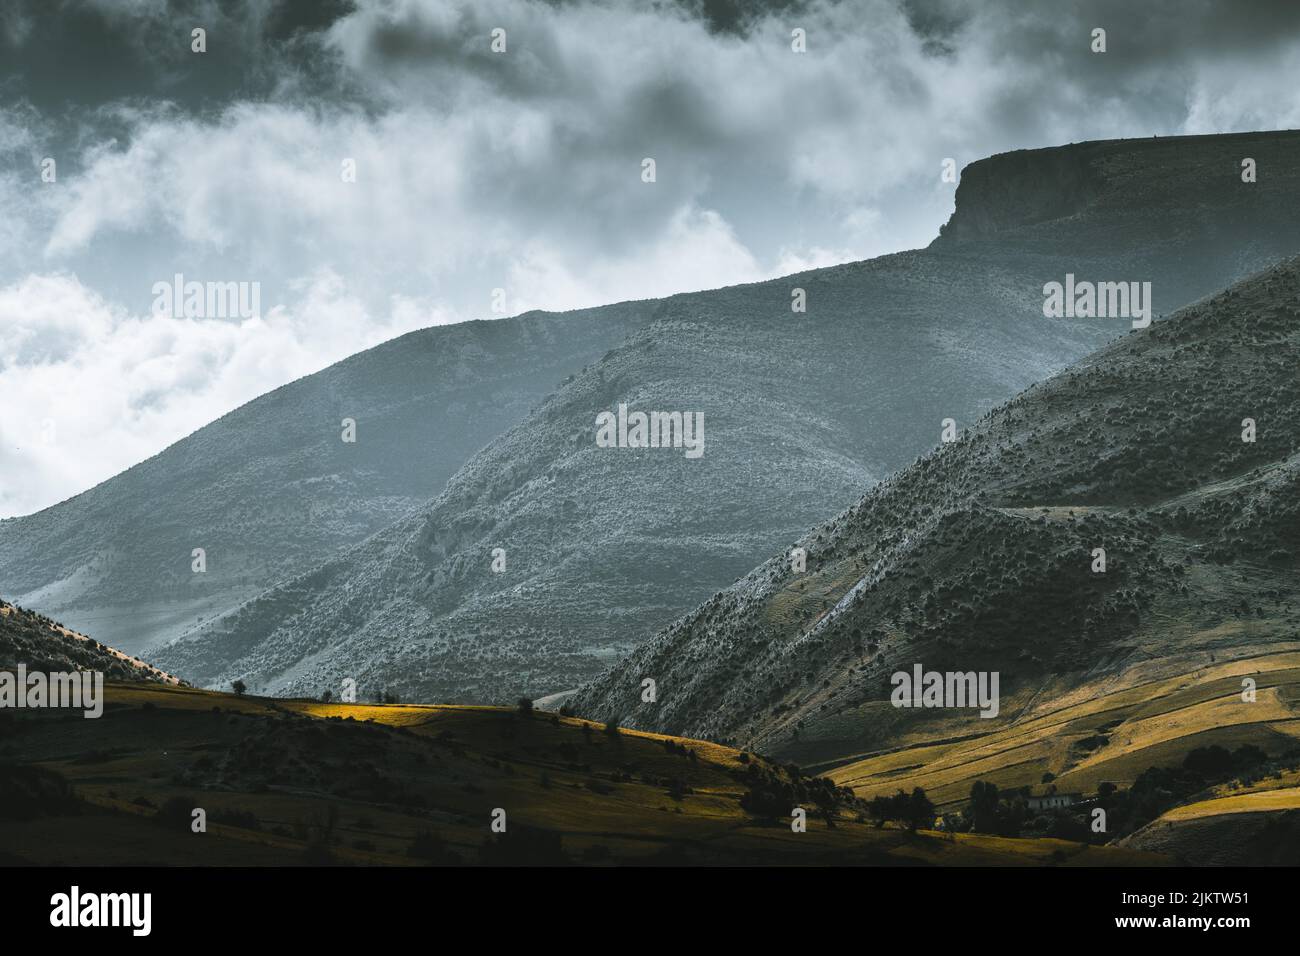 A peaceful mountainscape in the background of dramatic cloudy sky Stock Photo